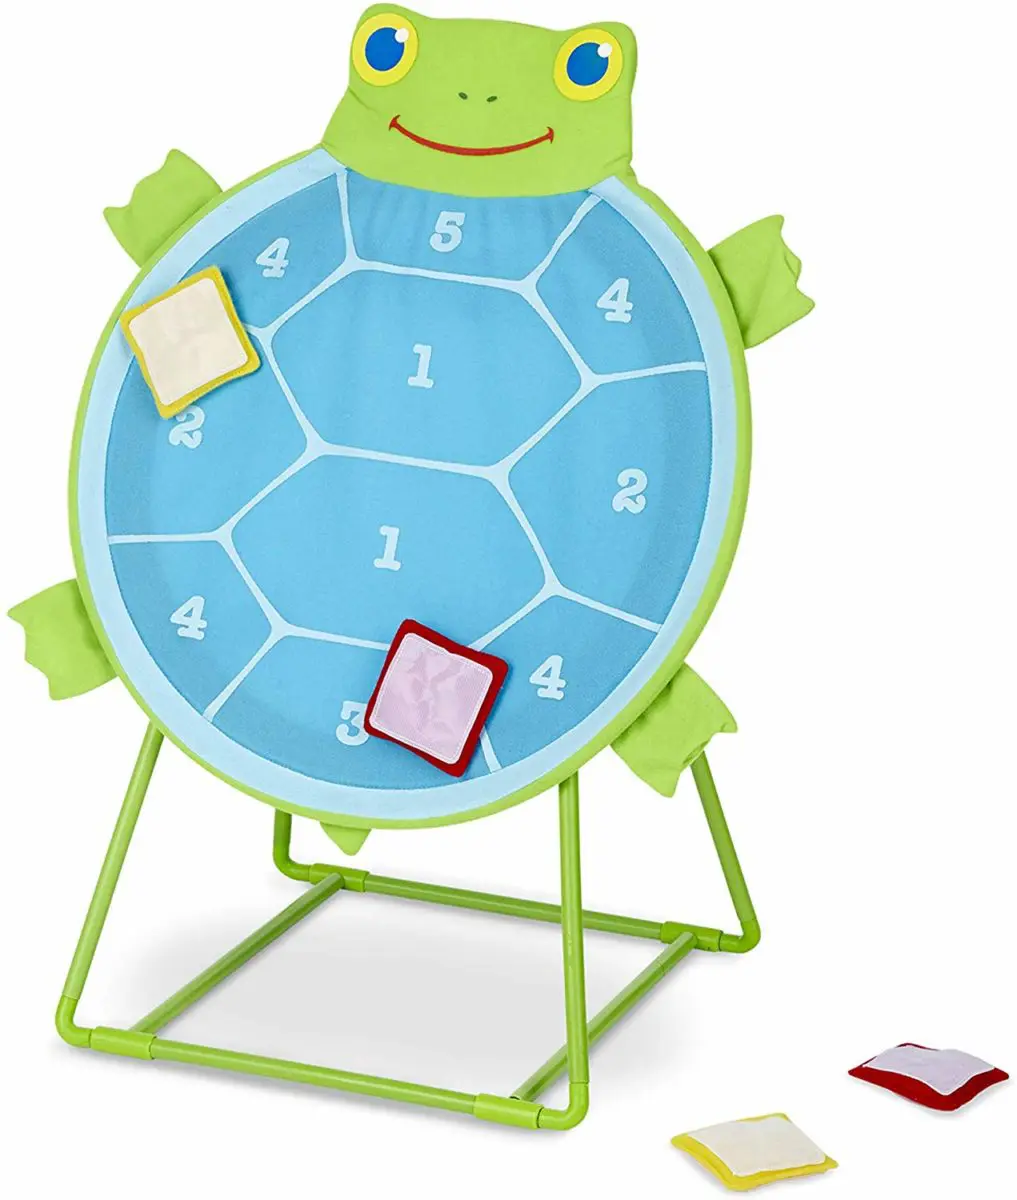 Melissa _ Doug Sunny Patch Dilly Dally Tootle Turtle Target Game - Top Toys and Gifts for Four Year Old Boys 1